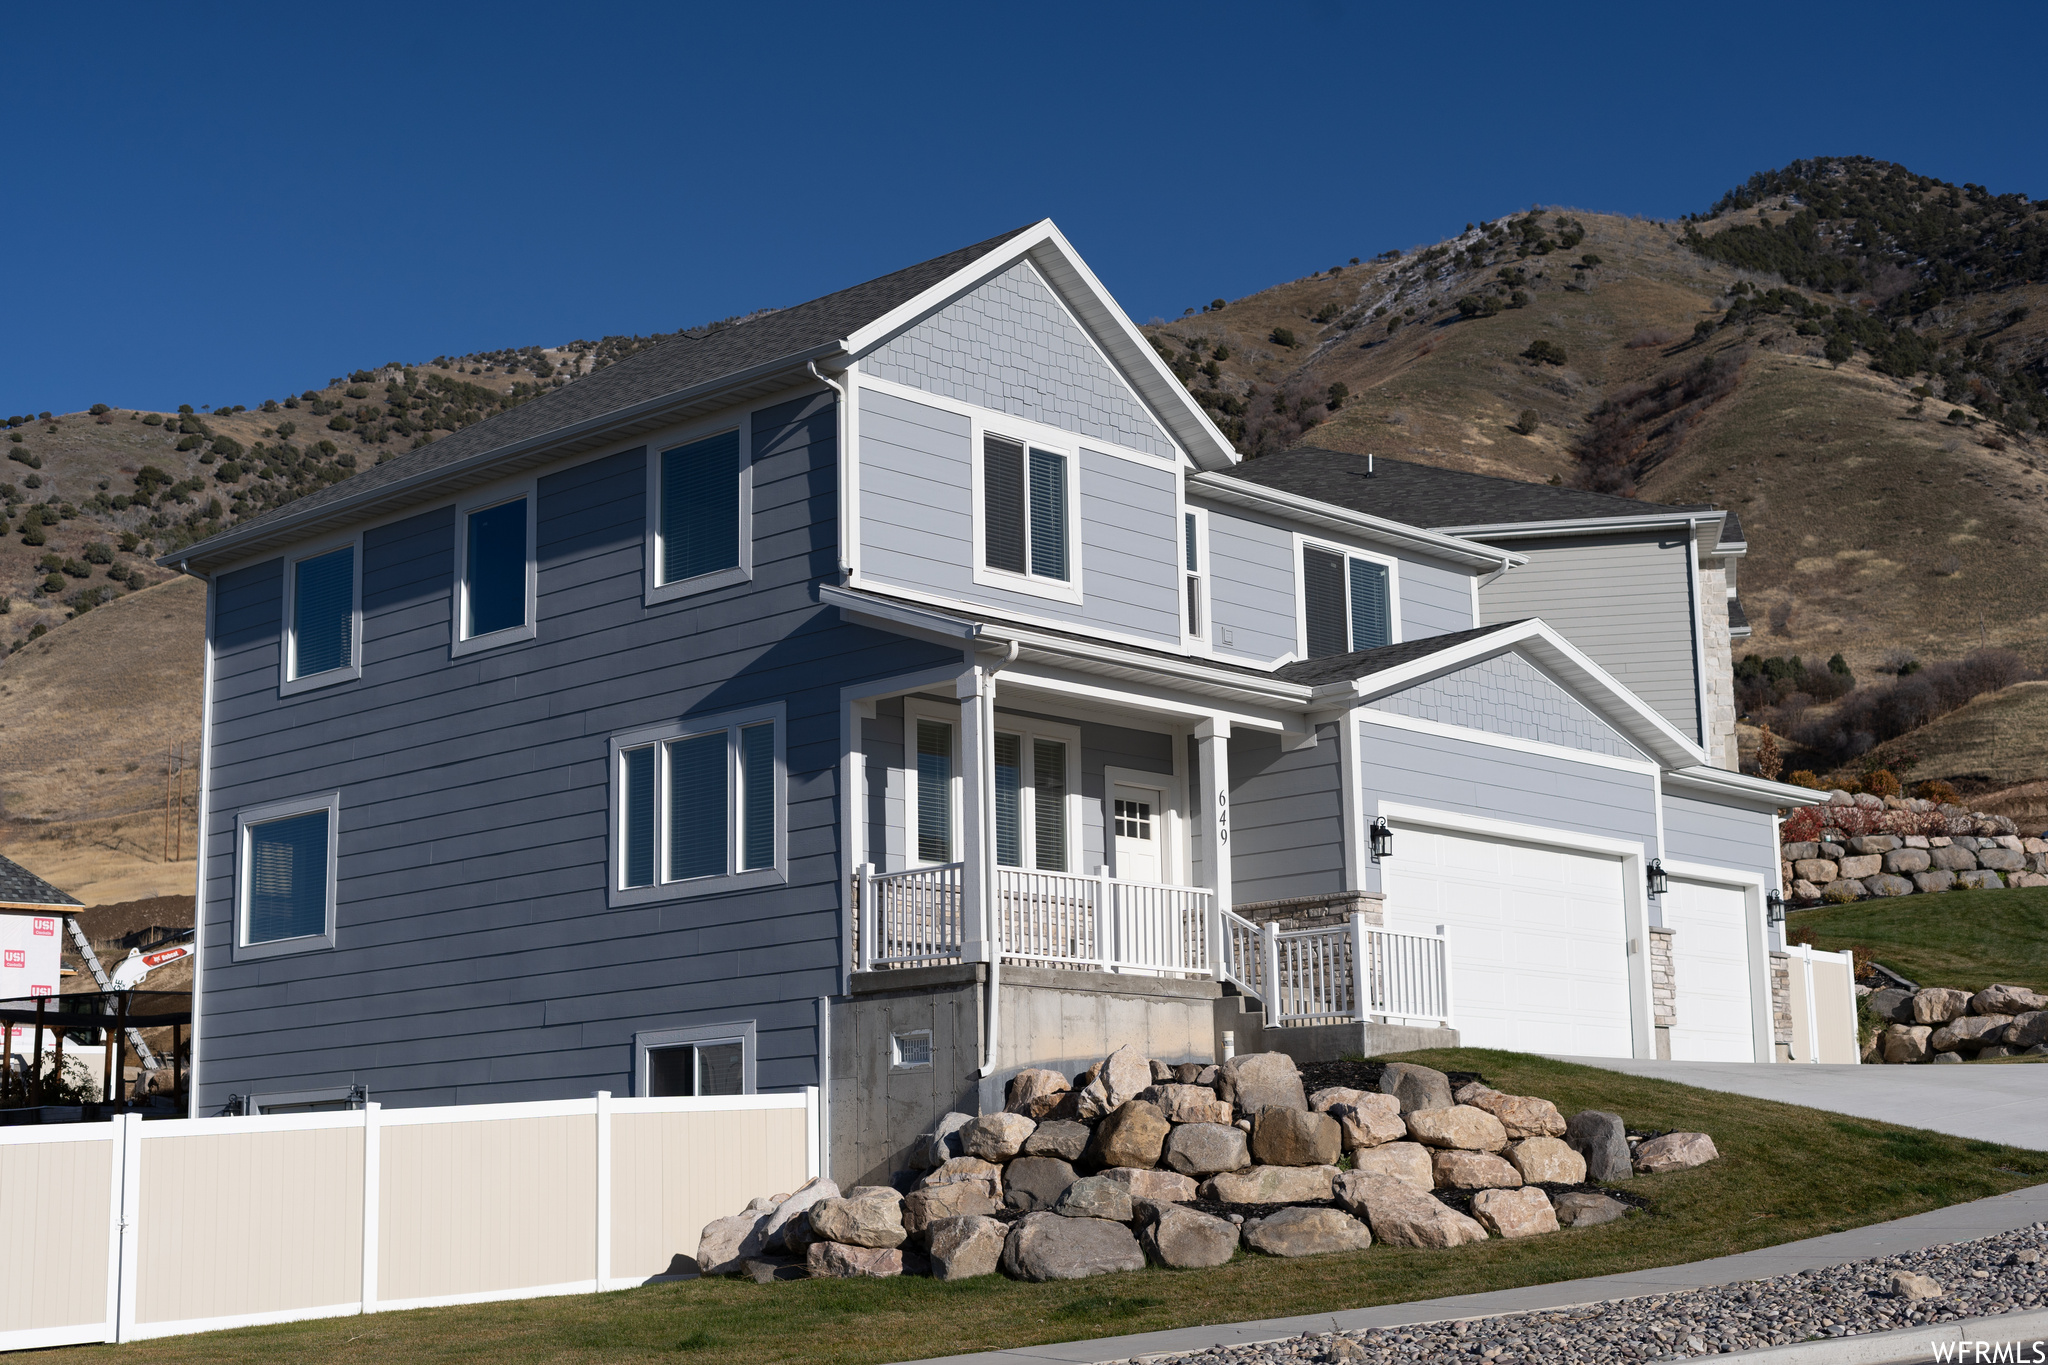 View of front facade with a garage and a mountain view